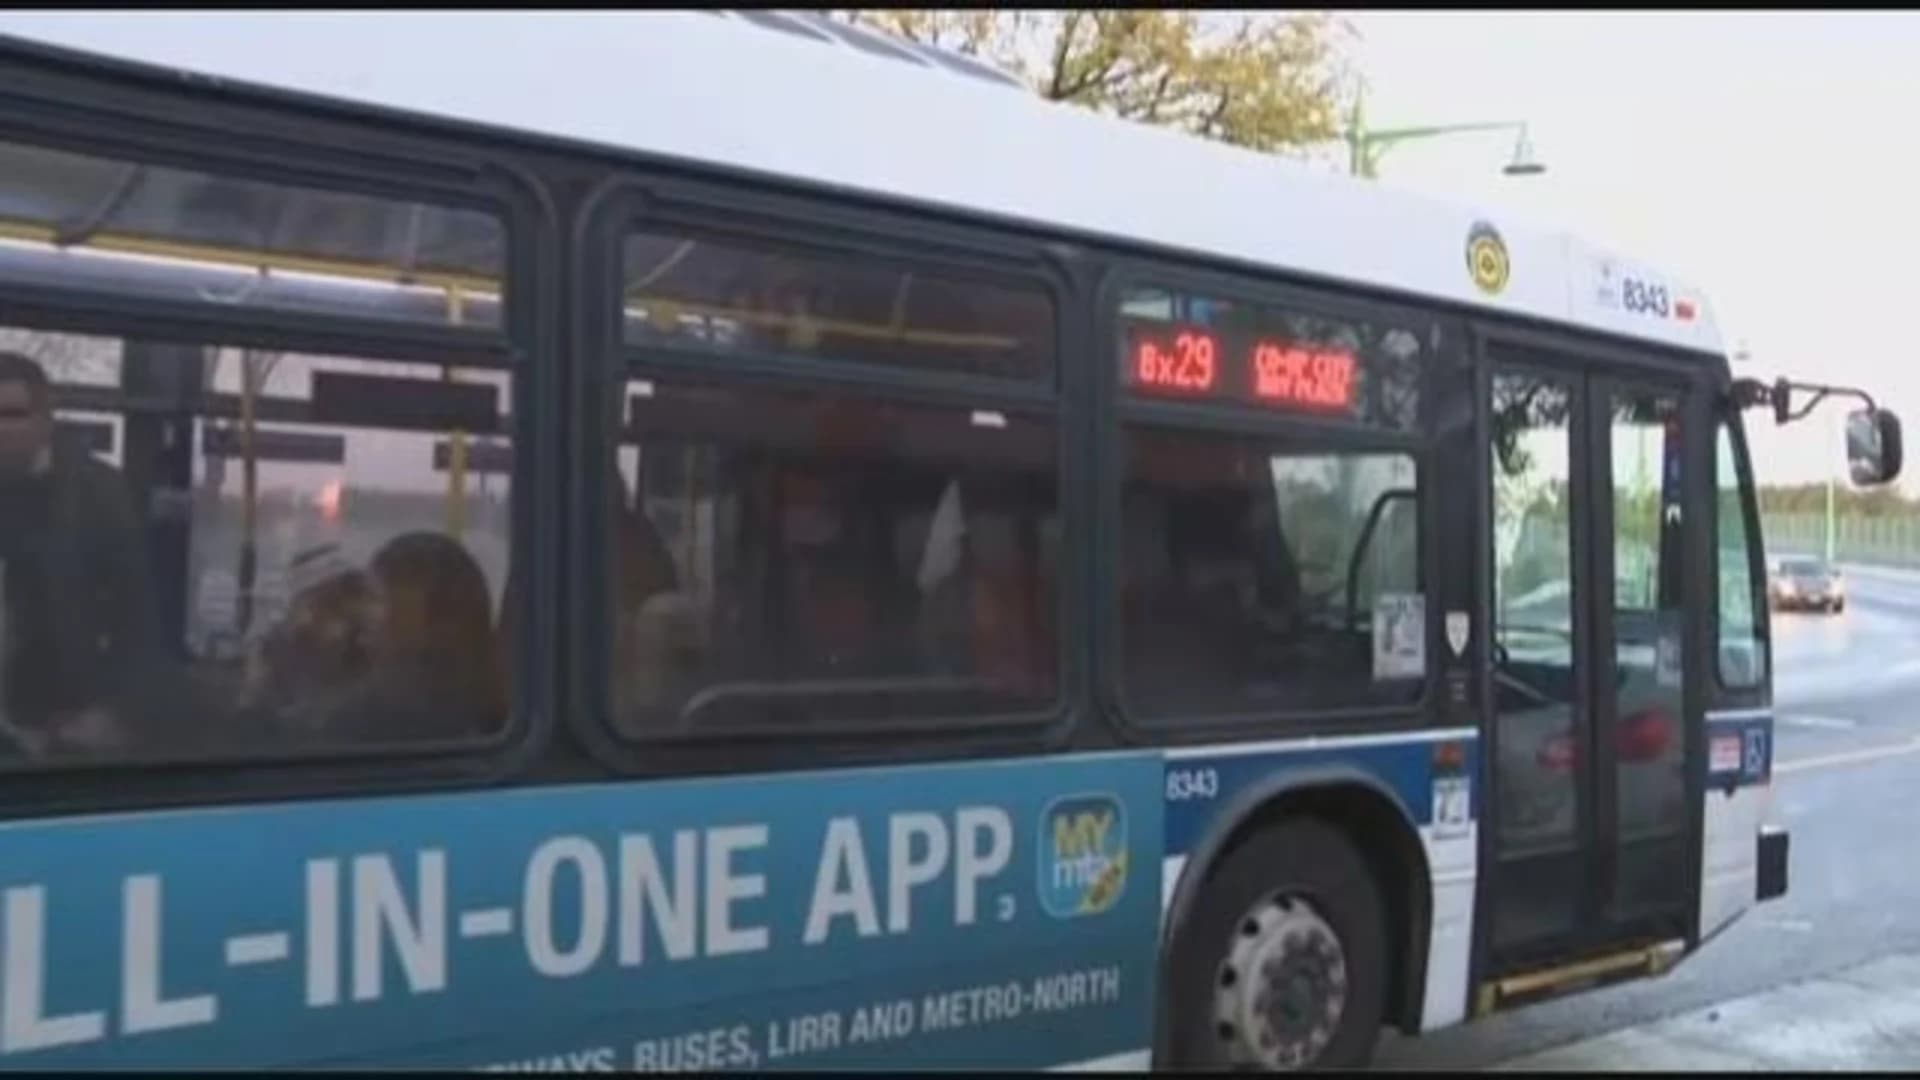 City announces revamp of Bx29 bus line in City Island, will run 24 hours